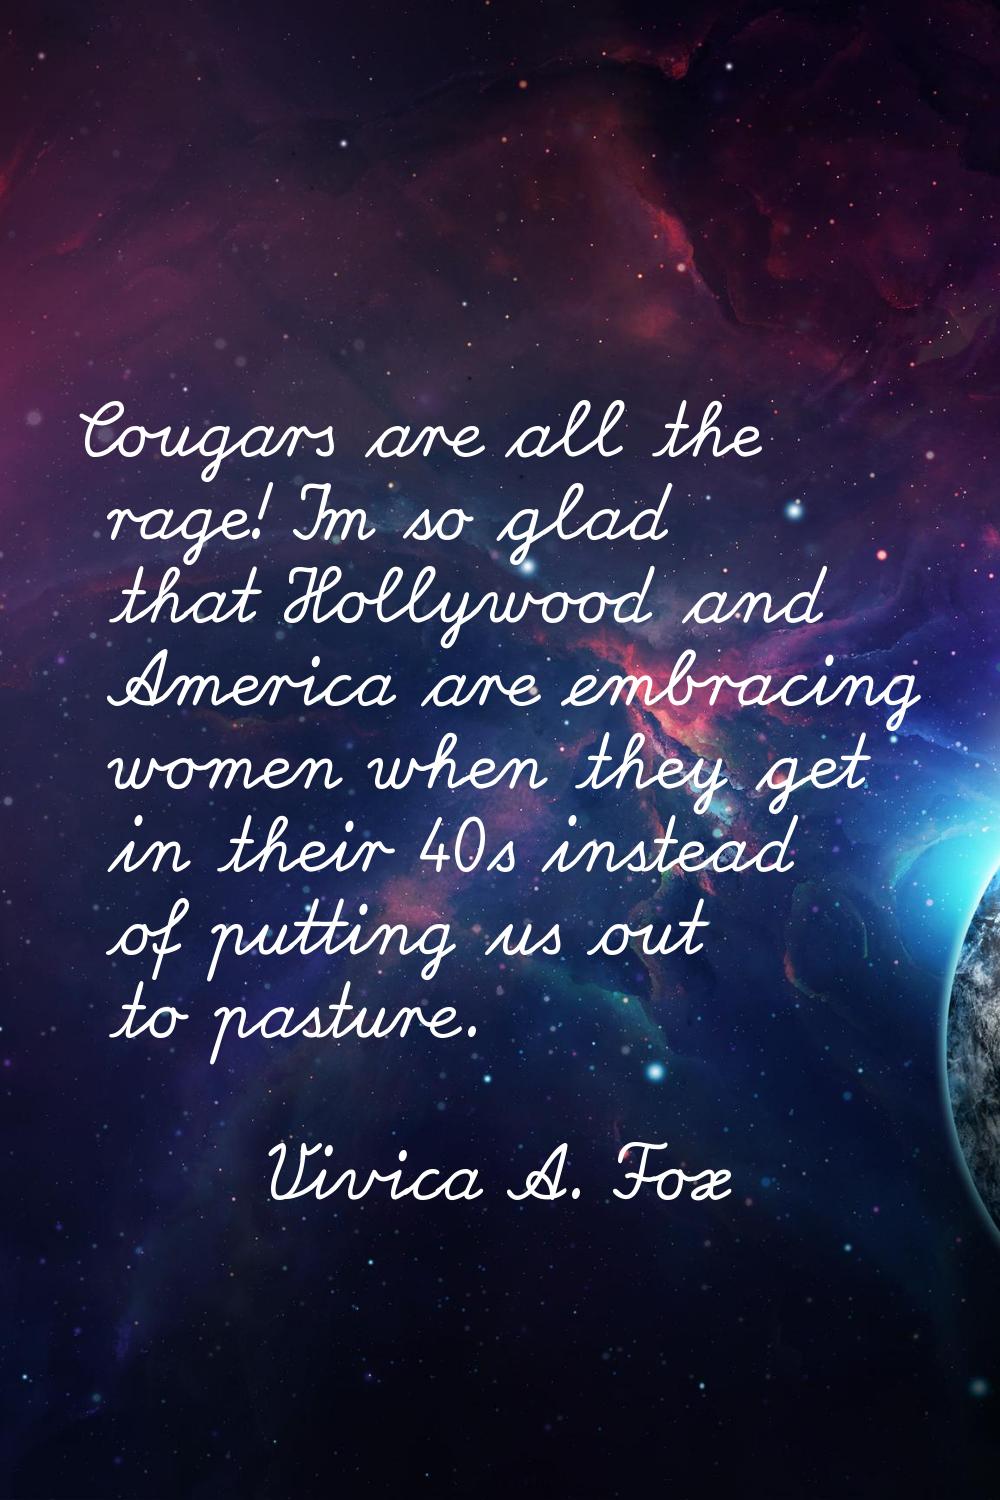 Cougars are all the rage! I'm so glad that Hollywood and America are embracing women when they get 